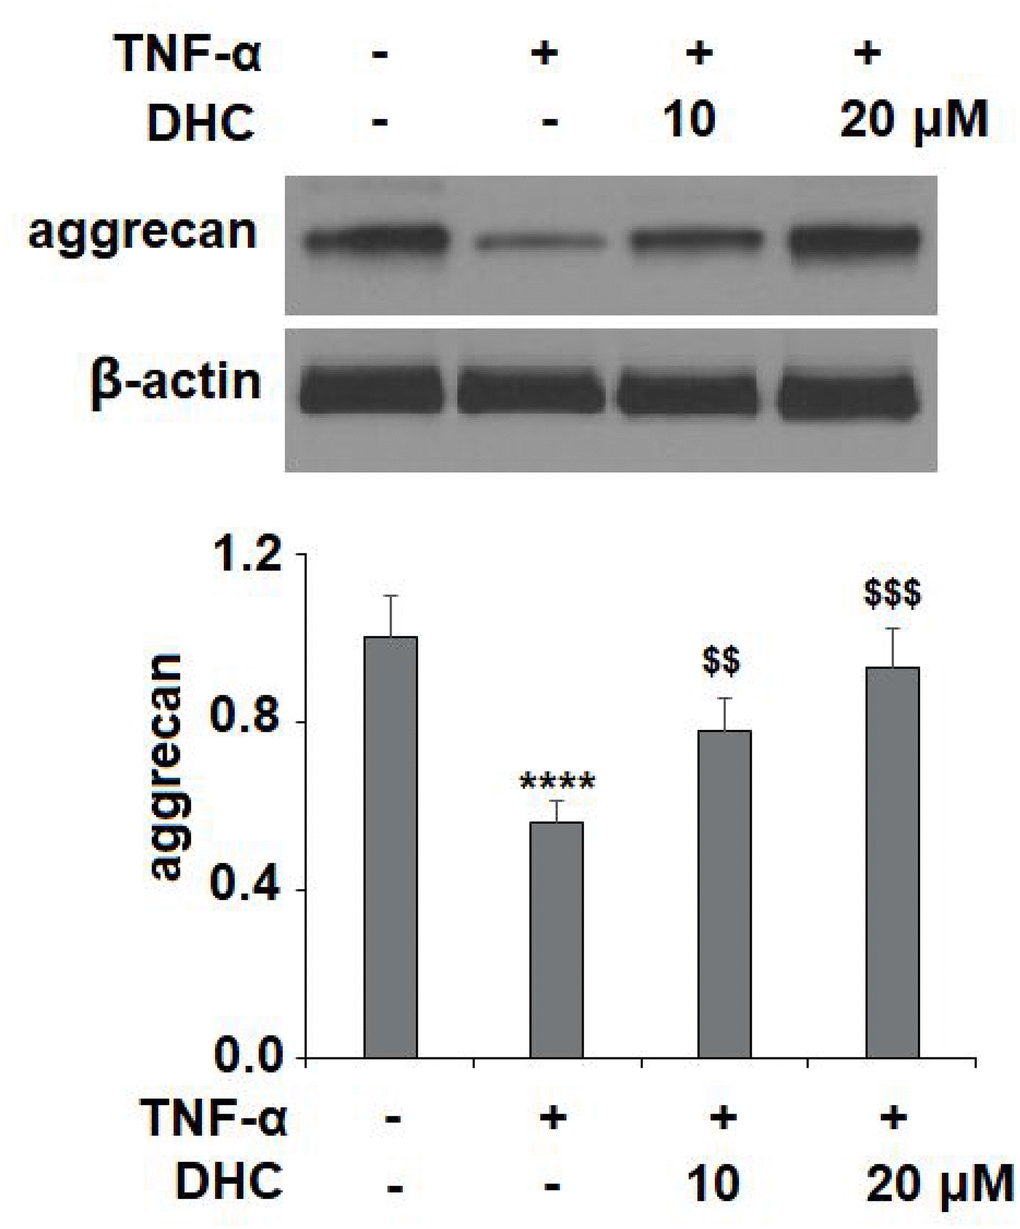 DHC prevented TNF-α-induced degradation of aggrecan. Cells were stimulated with TNF-α (10 ng/ml) in the presence or absence of 10 and 20 μM for 24 h. The expression of aggrecan was measured by western blot analysis (****, P